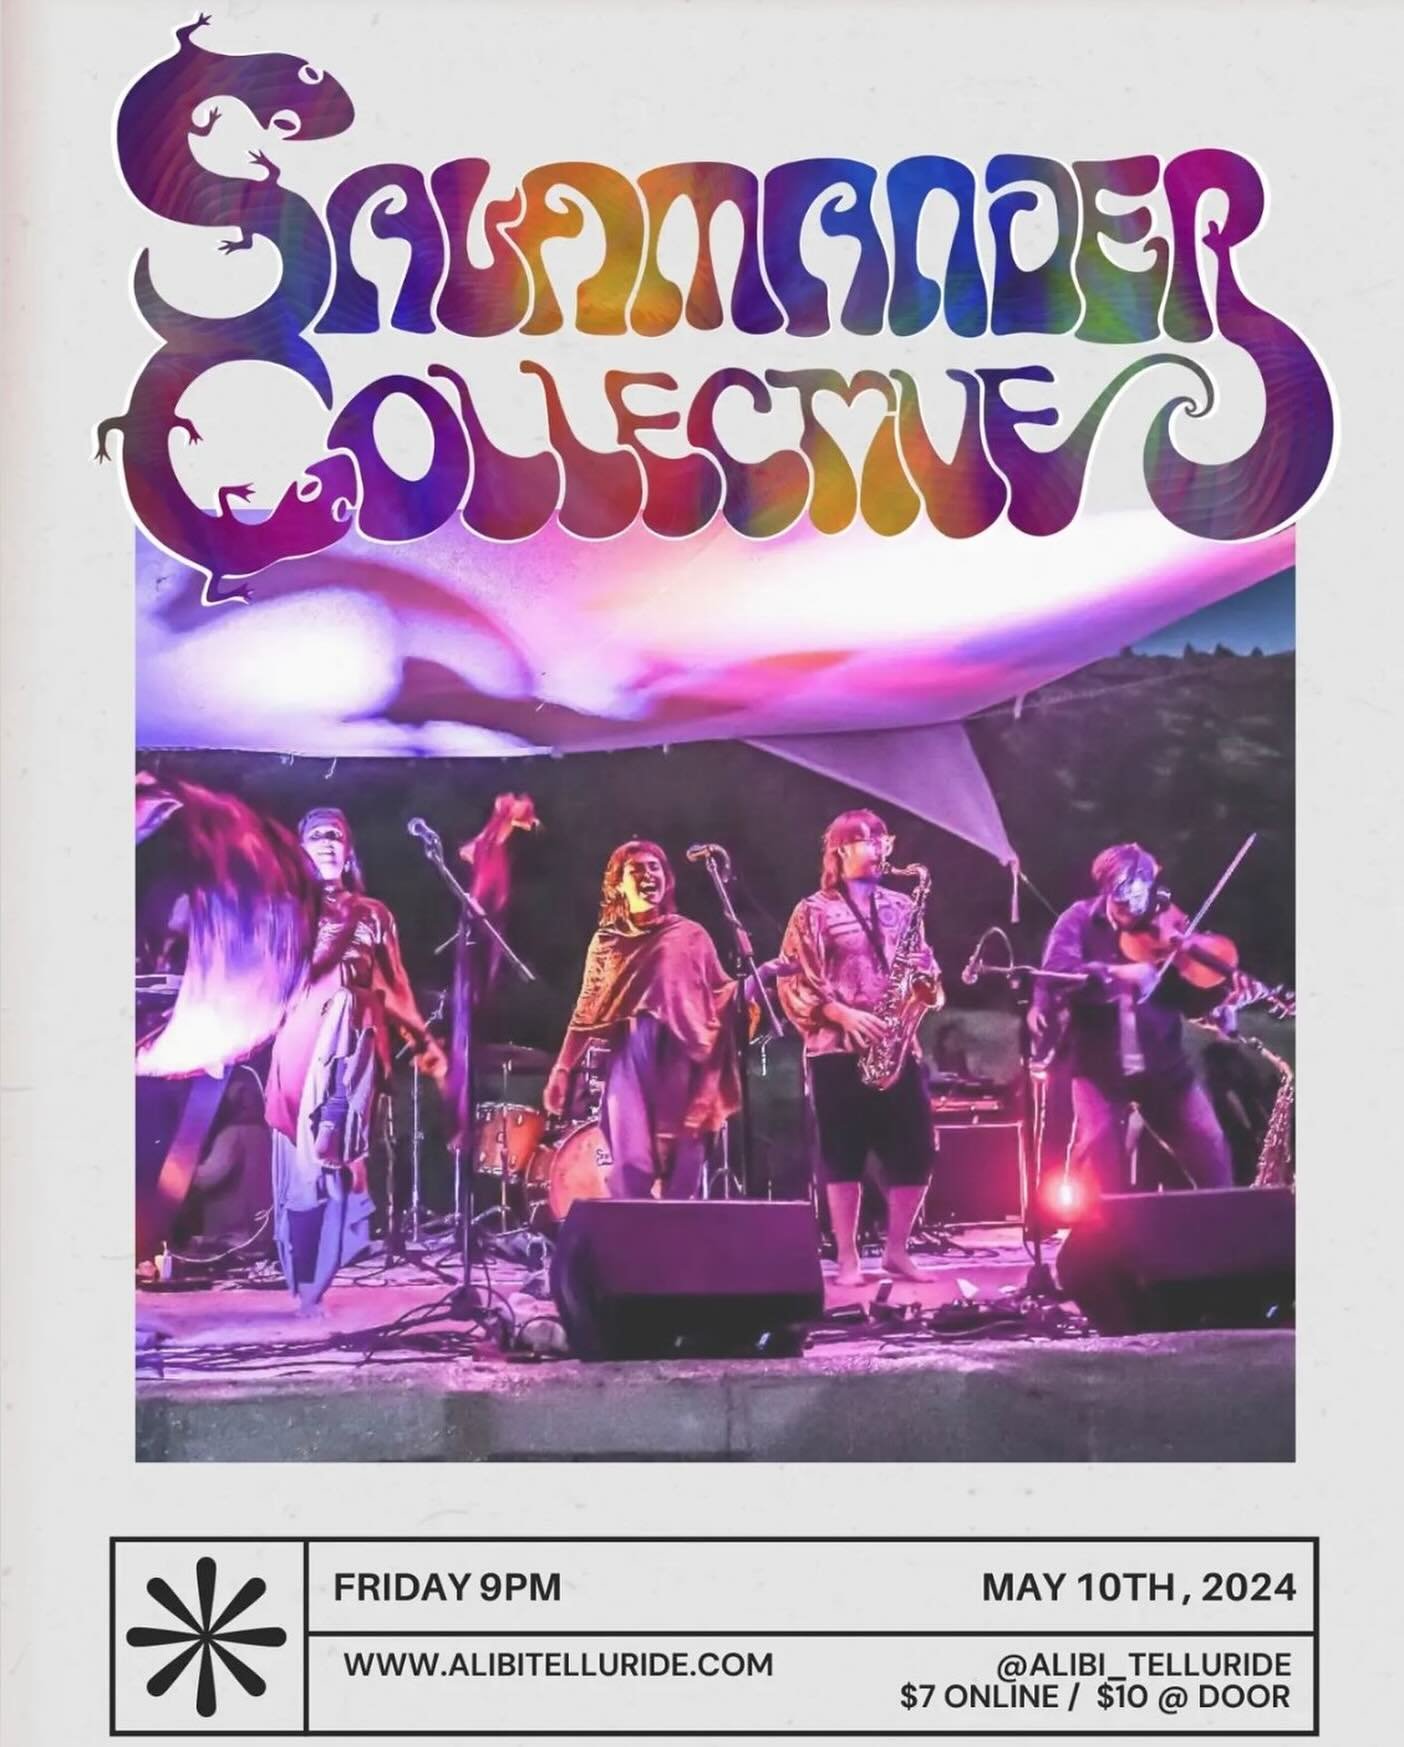 TELLURIDE! Live Music is back!! 🎶🎶🎶

This week-
Friday May 10th, 9pm @salamandercollective 💜💜

Saturday May 11th, 8pm @rubyjoyfulmusic featuring Drew Emmitt and Andy Thorn of @leftoversalmonmusic 🎻

Come jam 🪩

#telluridelivemusic #telluridecr